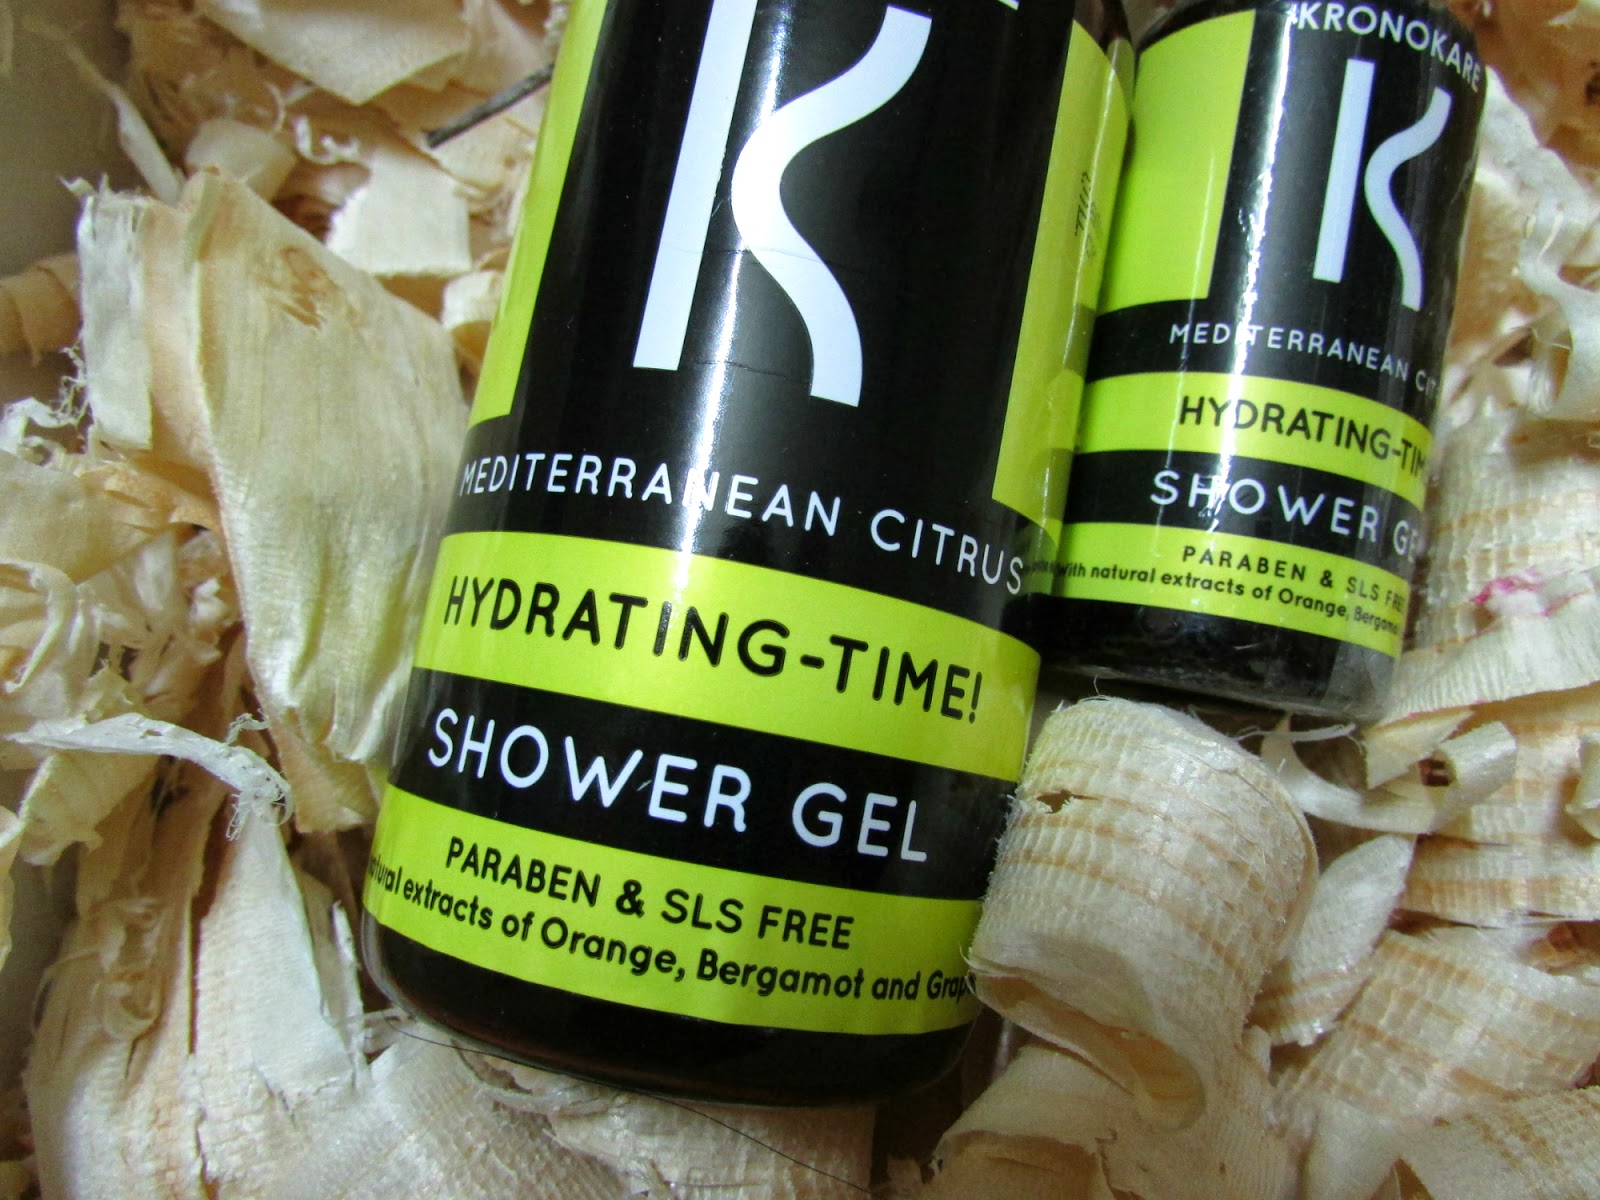 KRONOKARE Hydrating Time shower Gel,Body wash, body wash review, body wash review india, body wash price, body wash price india, body wash price and review, body wash price and review india, shower gel , shower gel review, shower gel review india, shower gel price, shower gel price india, shower gel price and review, shower gel price and review india, how to use shower gel, how to use body wash, how to use shower gel without loofa , how to use shower gel with hands, how to use body wash without loofa, how to use body wash with hands, how to use body wash with loofa, how to use shower gel with loofa, best shower gel, worst shower gel, best body wash, worst body wash,how to take bath with body wash, how to take bath with shower gel, how to take bath without soap, how to take bath, how to take shower, how to clean body, economical shower gel, economical body wash, KRONOKARE shower gel, KRONOKARE body wash , palmolive shower gel review, palmolive shower gel review india, palmolive shower gel price, palmolive shower gel price india, palmolive body wash ,palmolive body wash review, KRONOKARE body wash review india, KRONOKARE body wash price, KRONOKARE body wash price india, KRONOKARE body wash review and price india, KRONOKARE shower gel review and price, KRONOKARE body wash review and price india, KRONOKARE shower gel review and price india, KRONOKARE aroma absolute relax shower gel, KRONOKARE Mediterranean Citrus body wash, KRONOKARE Mediterranean Citrus shower gel review, KRONOKARE Mediterranean Citrus shower gel review india, KRONOKARE Mediterranean Citrus shower gel price, KRONOKARE Mediterranean Citrus shower gel price india, KRONOKARE Mediterranean Citrus shower gel price and review, KRONOKARE Mediterranean Citrus shower gel price and review india, KRONOKARE Mediterranean Citrus body wash review, KRONOKARE Mediterranean Citrus body was, KRONOKARE Mediterranean Citrus body wash review india, KRONOKARE Mediterranean Citrus price, KRONOKARE Mediterranean Citrus body wash price india, KRONOKARE Mediterranean Citrusreview and price, KRONOKARE Mediterranean Citrus price and review india, KRONOKARE Mediterranean Citrus soap, , KRONOKARE india, KRONOKARE Mediterranean Citrus , KRONOKARE Mediterranean Citrus shower gel, KRONOKARE Mediterranean Citrus  review, KRONOKARE Mediterranean Citrus  gel price, KRONOKARE Mediterranean Citrus  india, KRONOKARE Mediterranean Citrus shower gel review india, KRONOKARE Mediterranean Citrus shower gel price and review india, shower gel with herbal oil, shower gel with essential oil, shower gel with iris extract, shower gel with foam, shower gel that lathers, moisturising shower gel, hydrating shower gel, moisturising body wash, hydrating body wash, most moisturising body wash, most hydrating body wash, most moisturising shower gel,most hydrating shower gel, is using body wash good, is using shower gel good,Is using body wash hygienic, is using shower gel hygienic,beauty , fashion,beauty and fashion,beauty blog, fashion blog , indian beauty blog,indian fashion blog, beauty and fashion blog, indian beauty and fashion blog, indian bloggers, indian beauty bloggers, indian fashion bloggers,indian bloggers online, top 10 indian bloggers, top indian bloggers,top 10 fashion bloggers, indian bloggers on blogspot,home remedies, how to, at home spa, spa therepy bofy wash, 